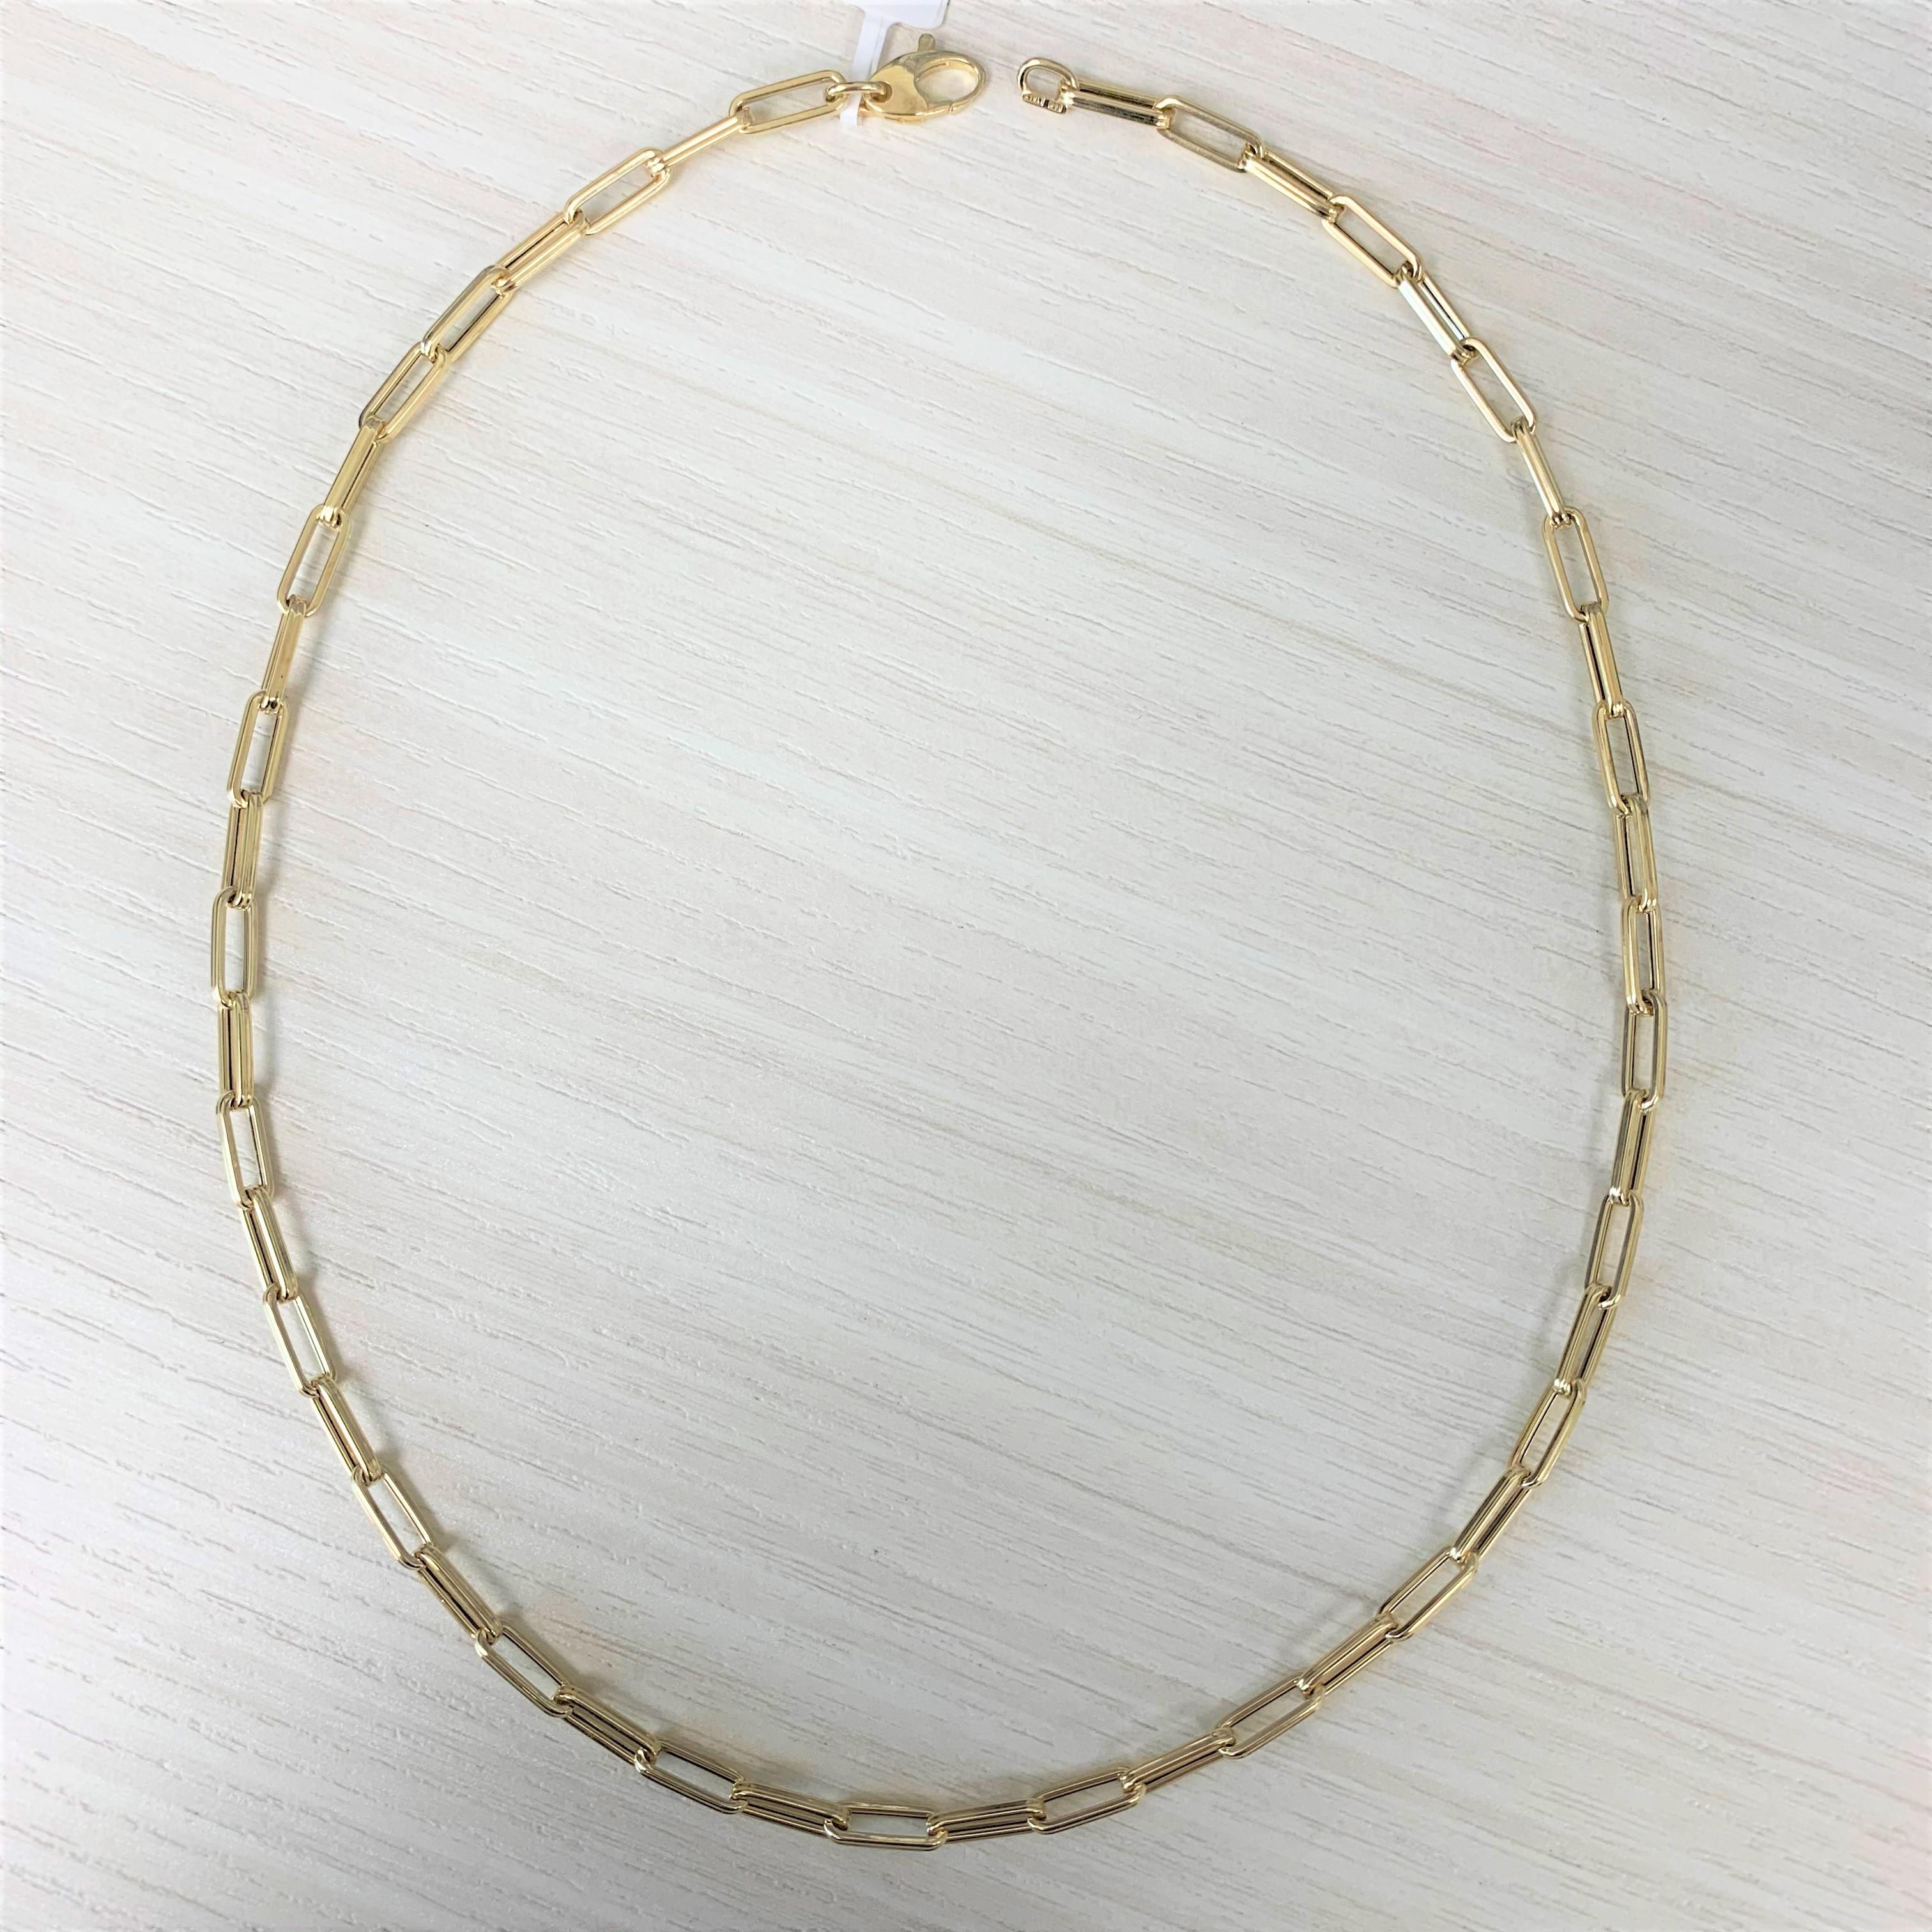 Contemporary 14 Karat Yellow Gold Paperclip Link Chain Necklace, Made in Italy For Sale